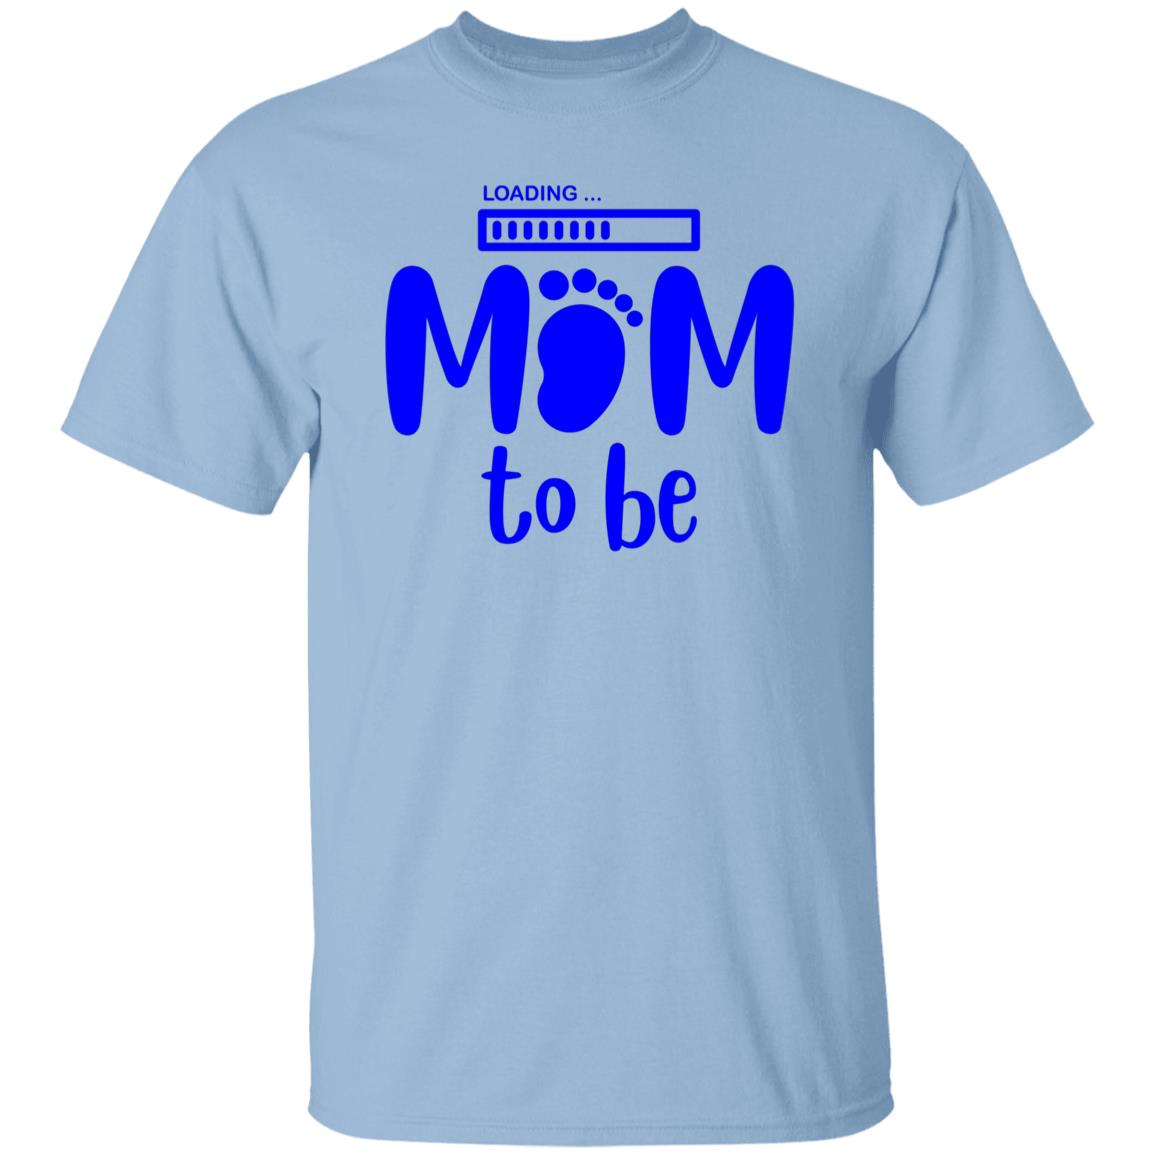 Mom to be (Blue Print)